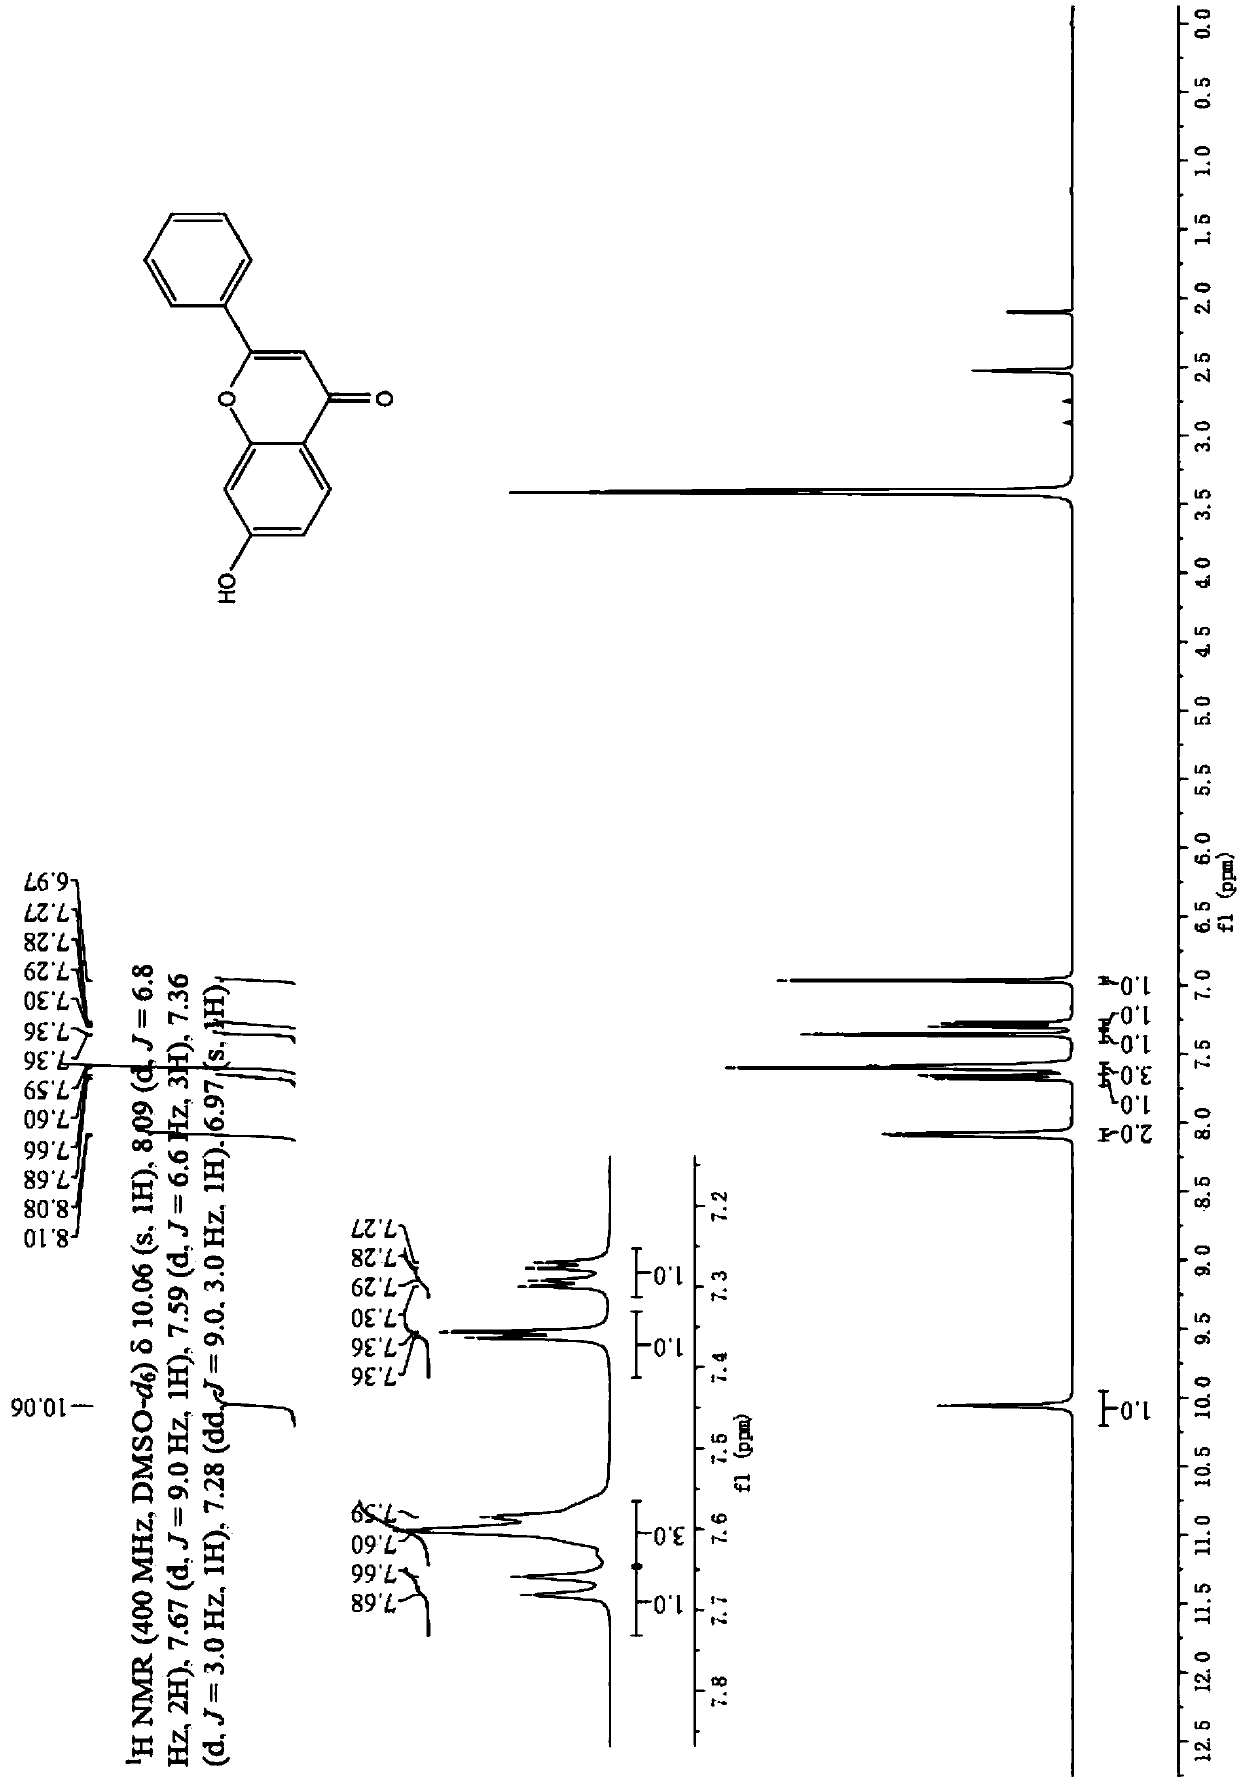 Method for synthesizing 2-aryl benzopyrone flavonoid derivatives